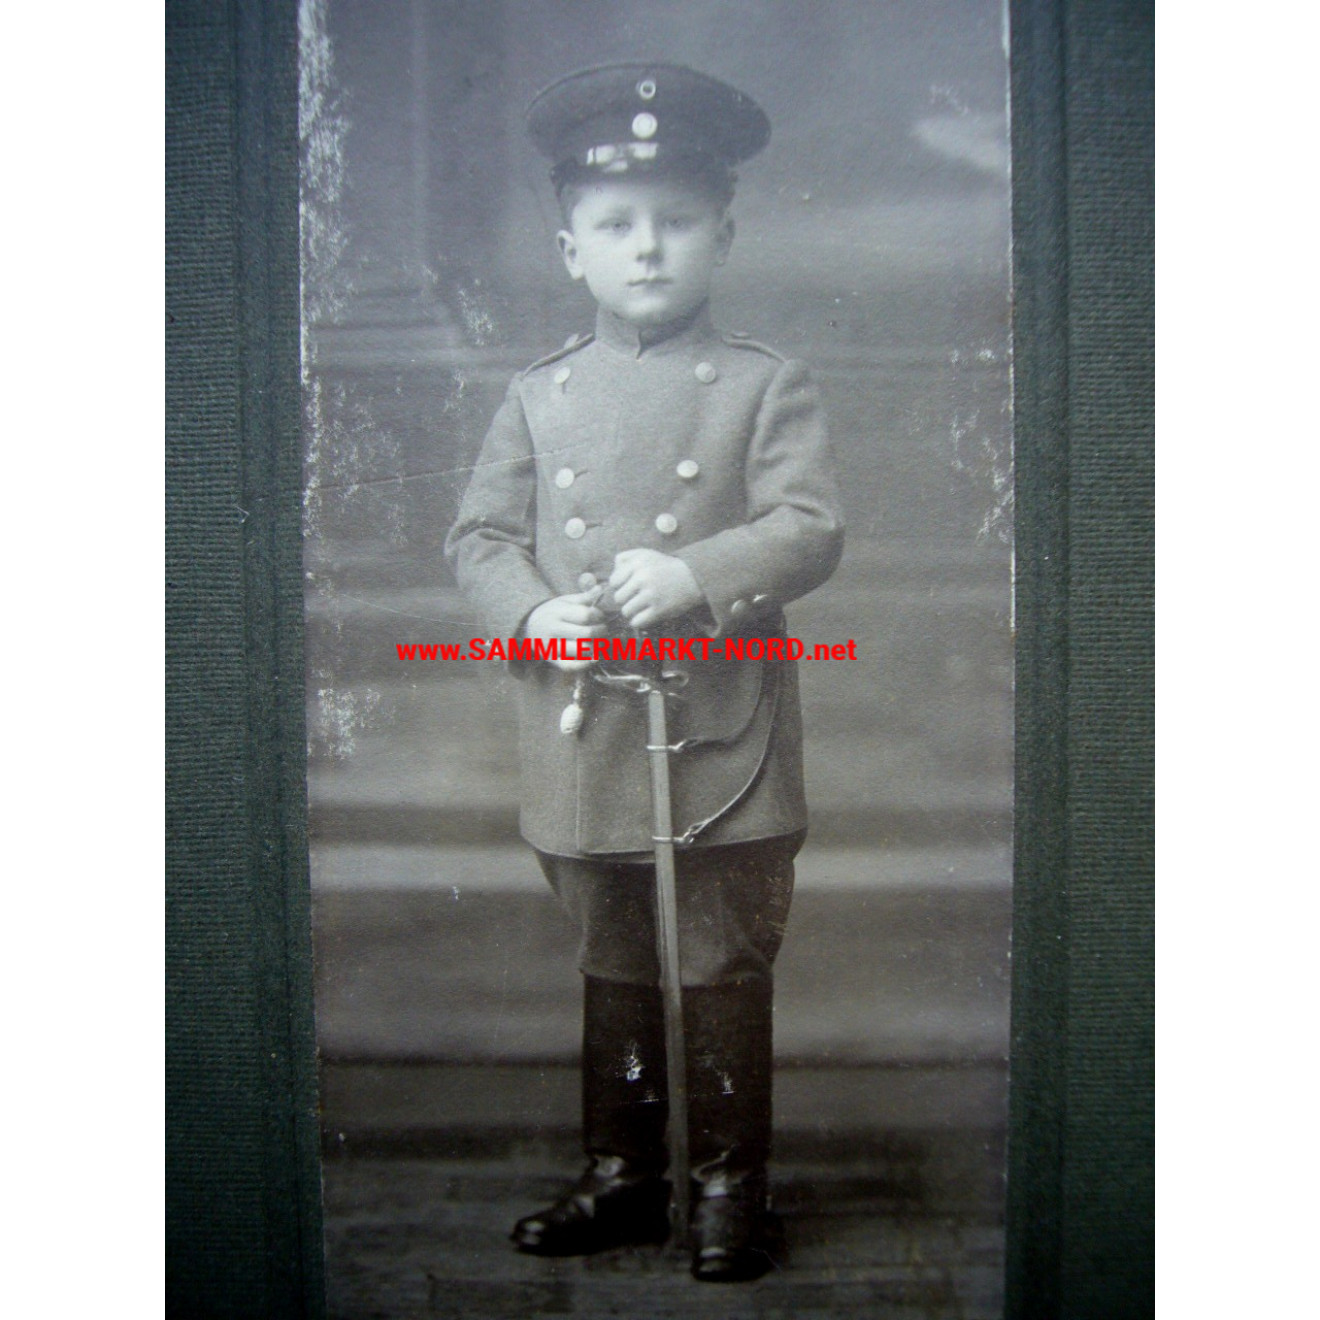 Cabinet photo - Child in uniform with sabre